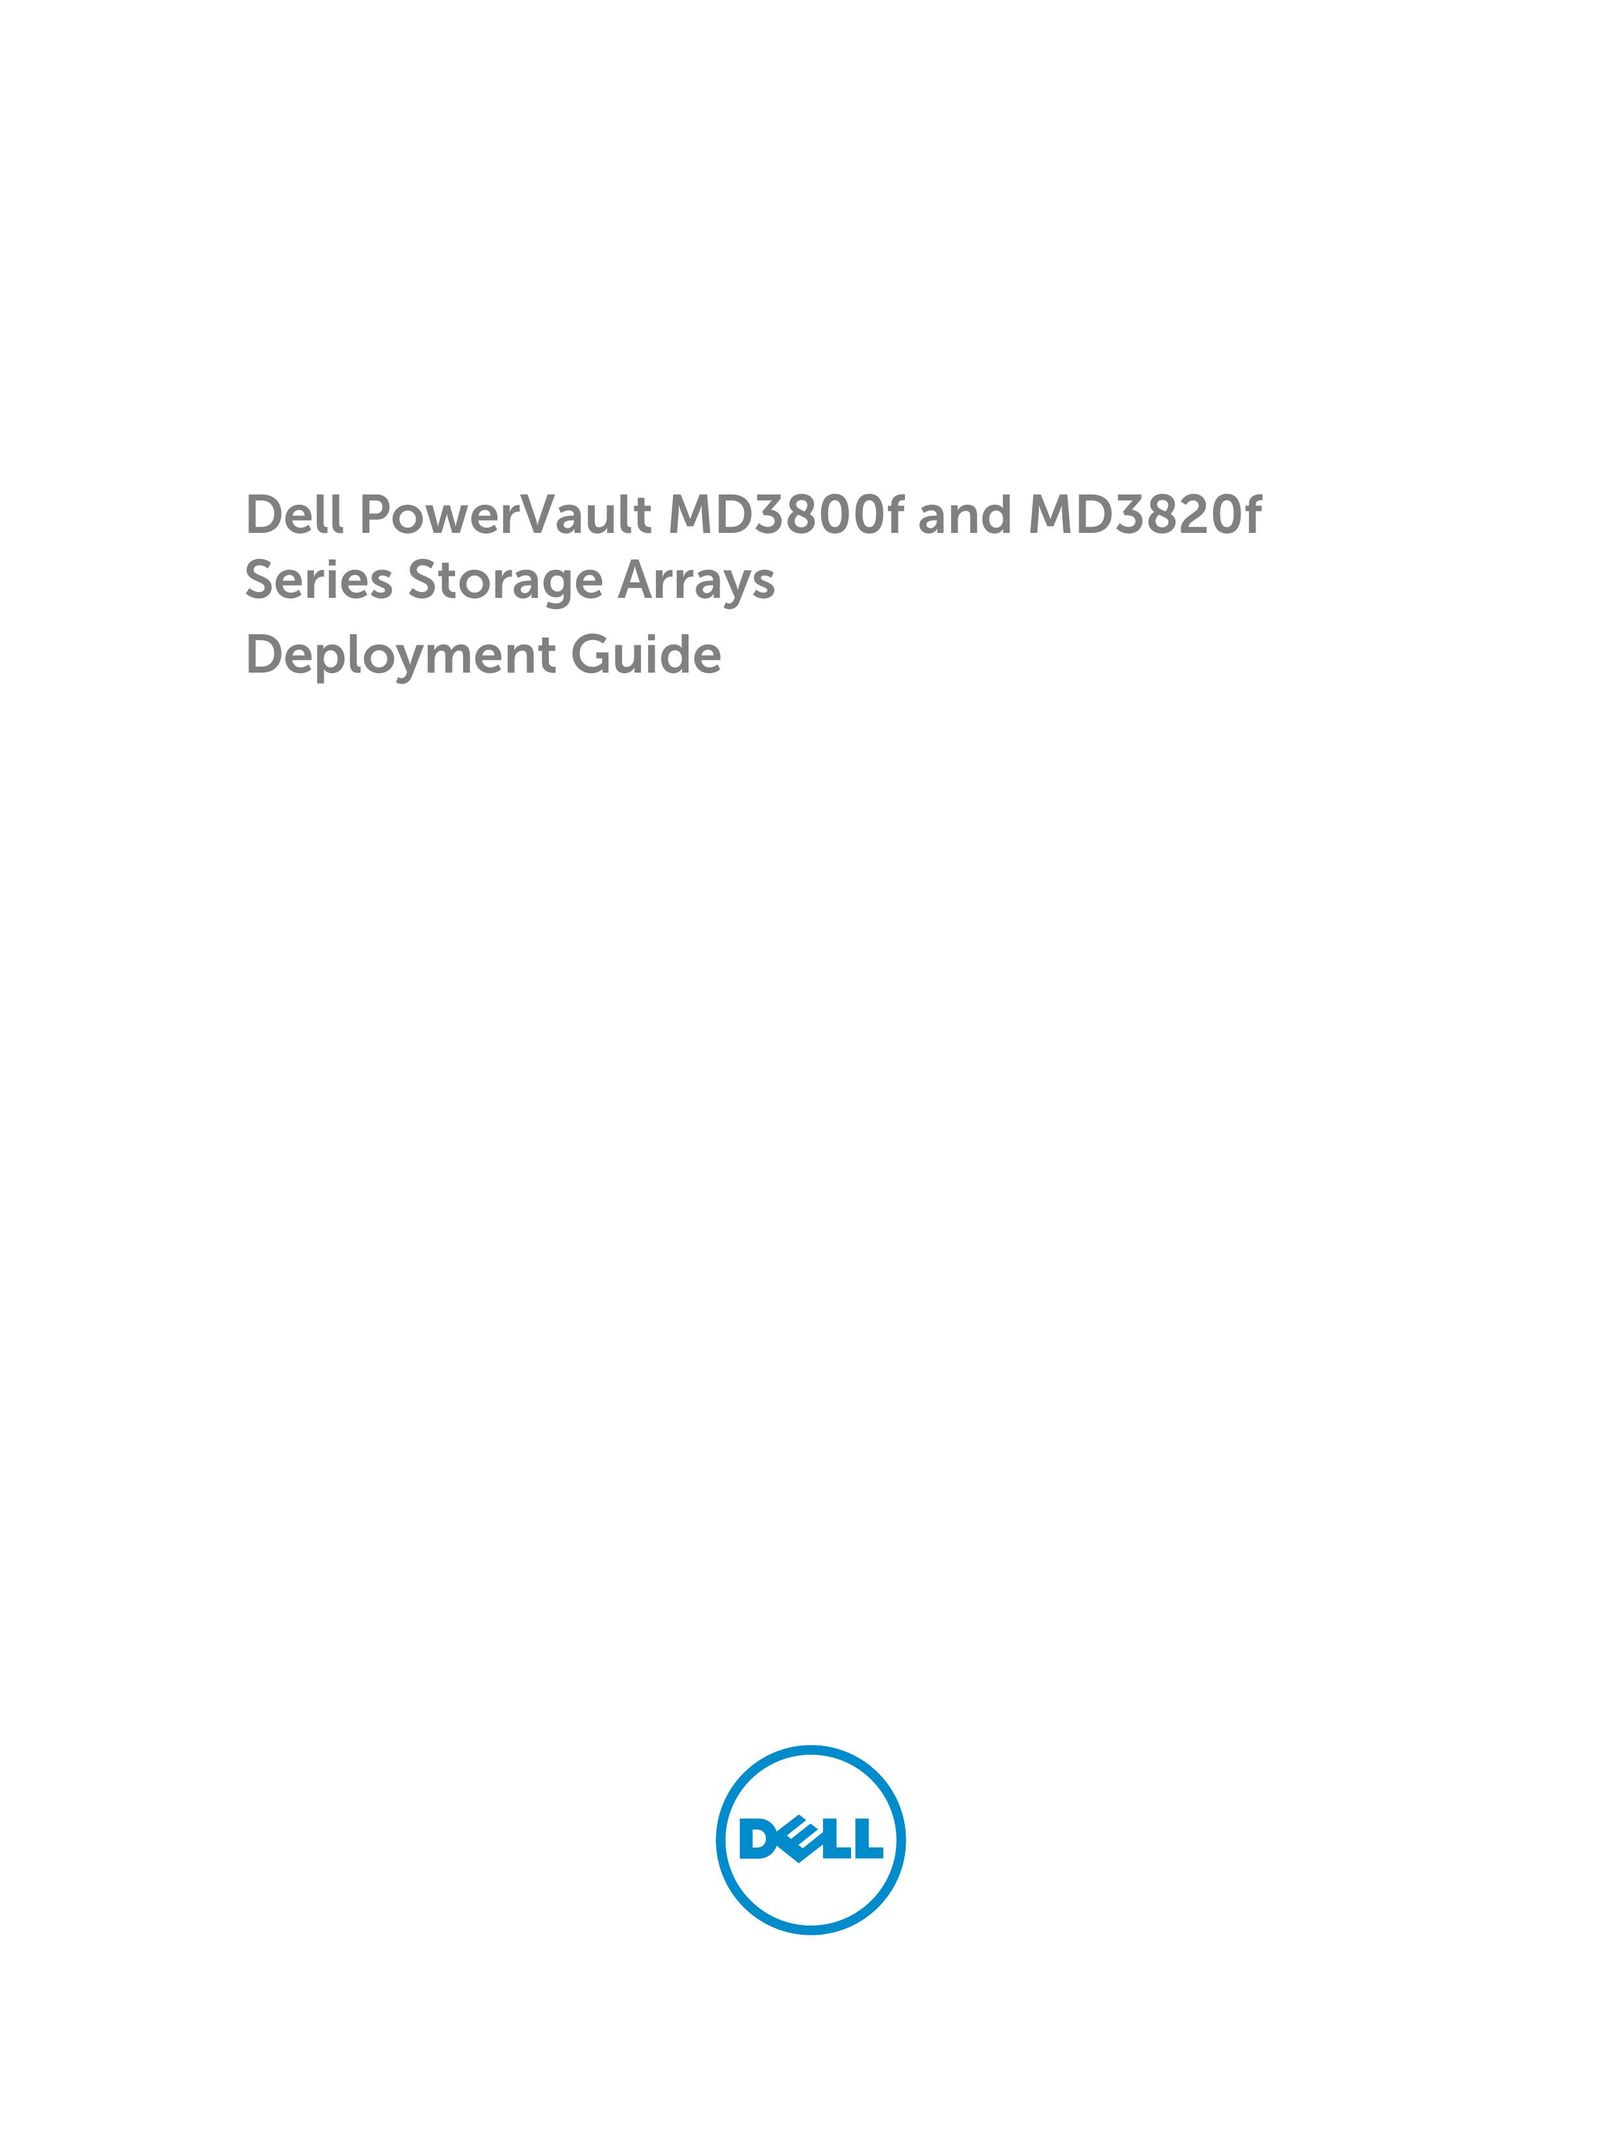 Dell MD3820f Riding Toy User Manual